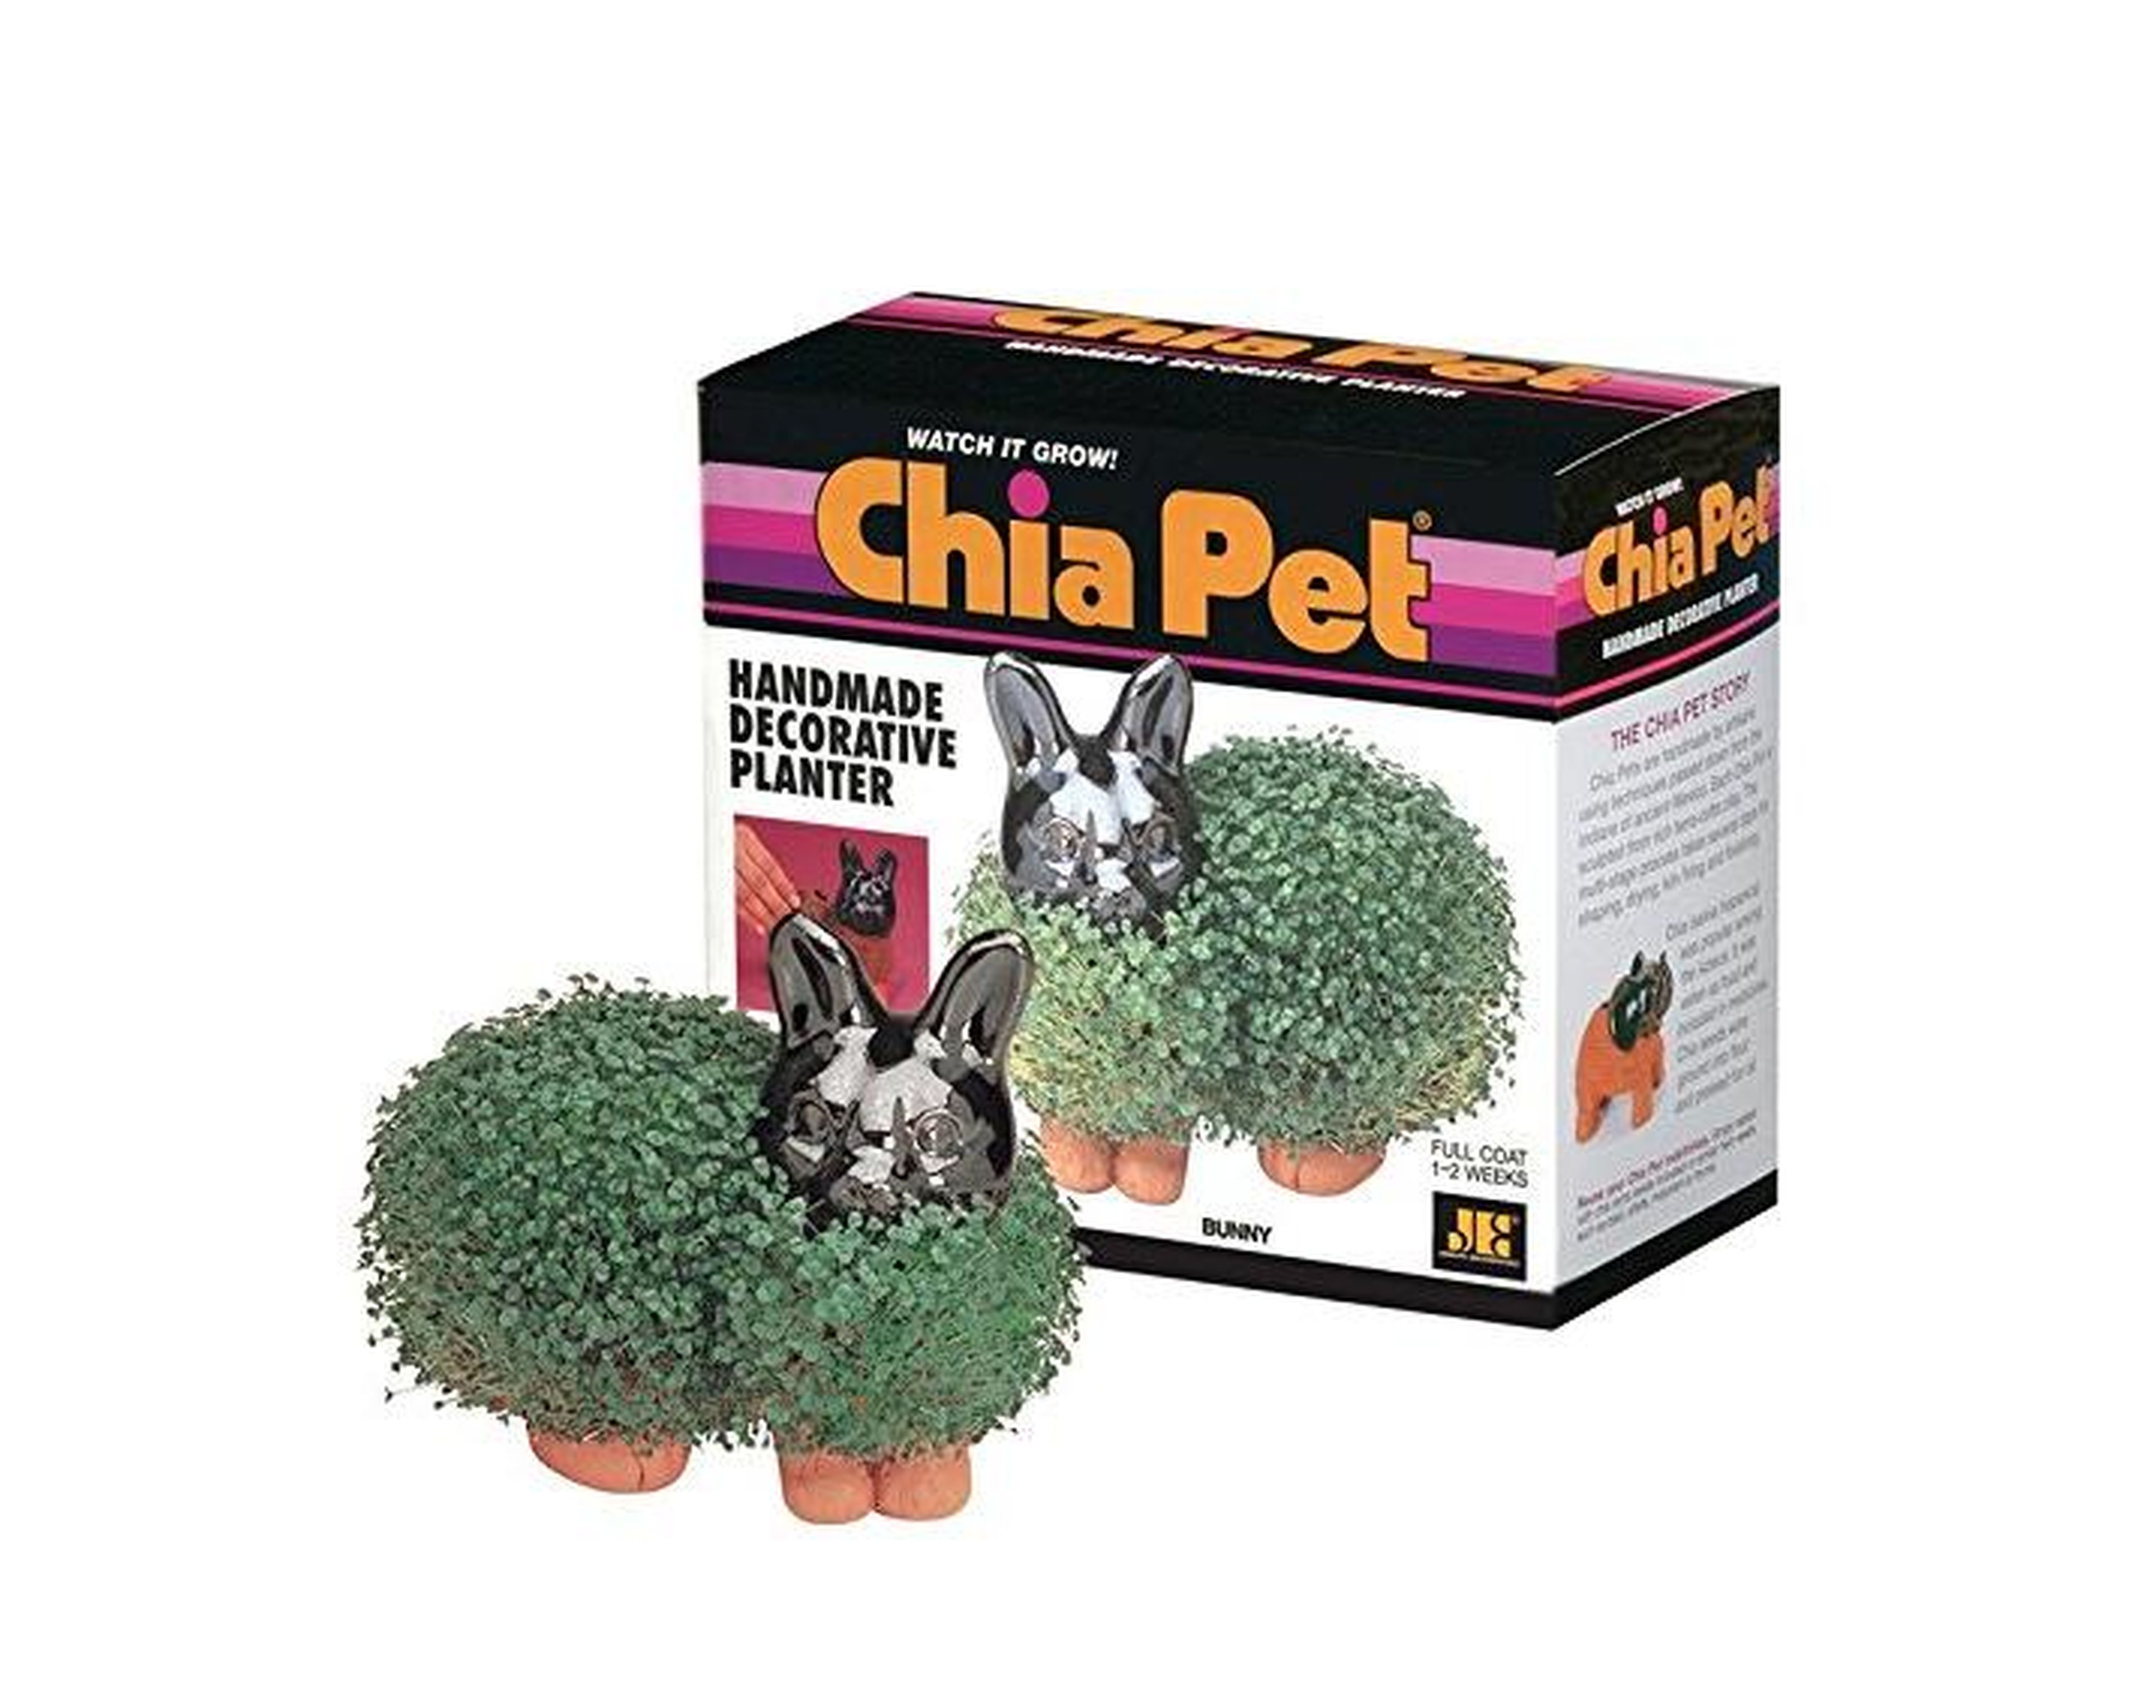 The Chia Pet — clay figures filled with water and coated in seeds that sprout greenery — is a cultural icon. You can buy a chia pet of a dog, cat, bunny, or even the president. The company sells 500,000 every holiday season. At